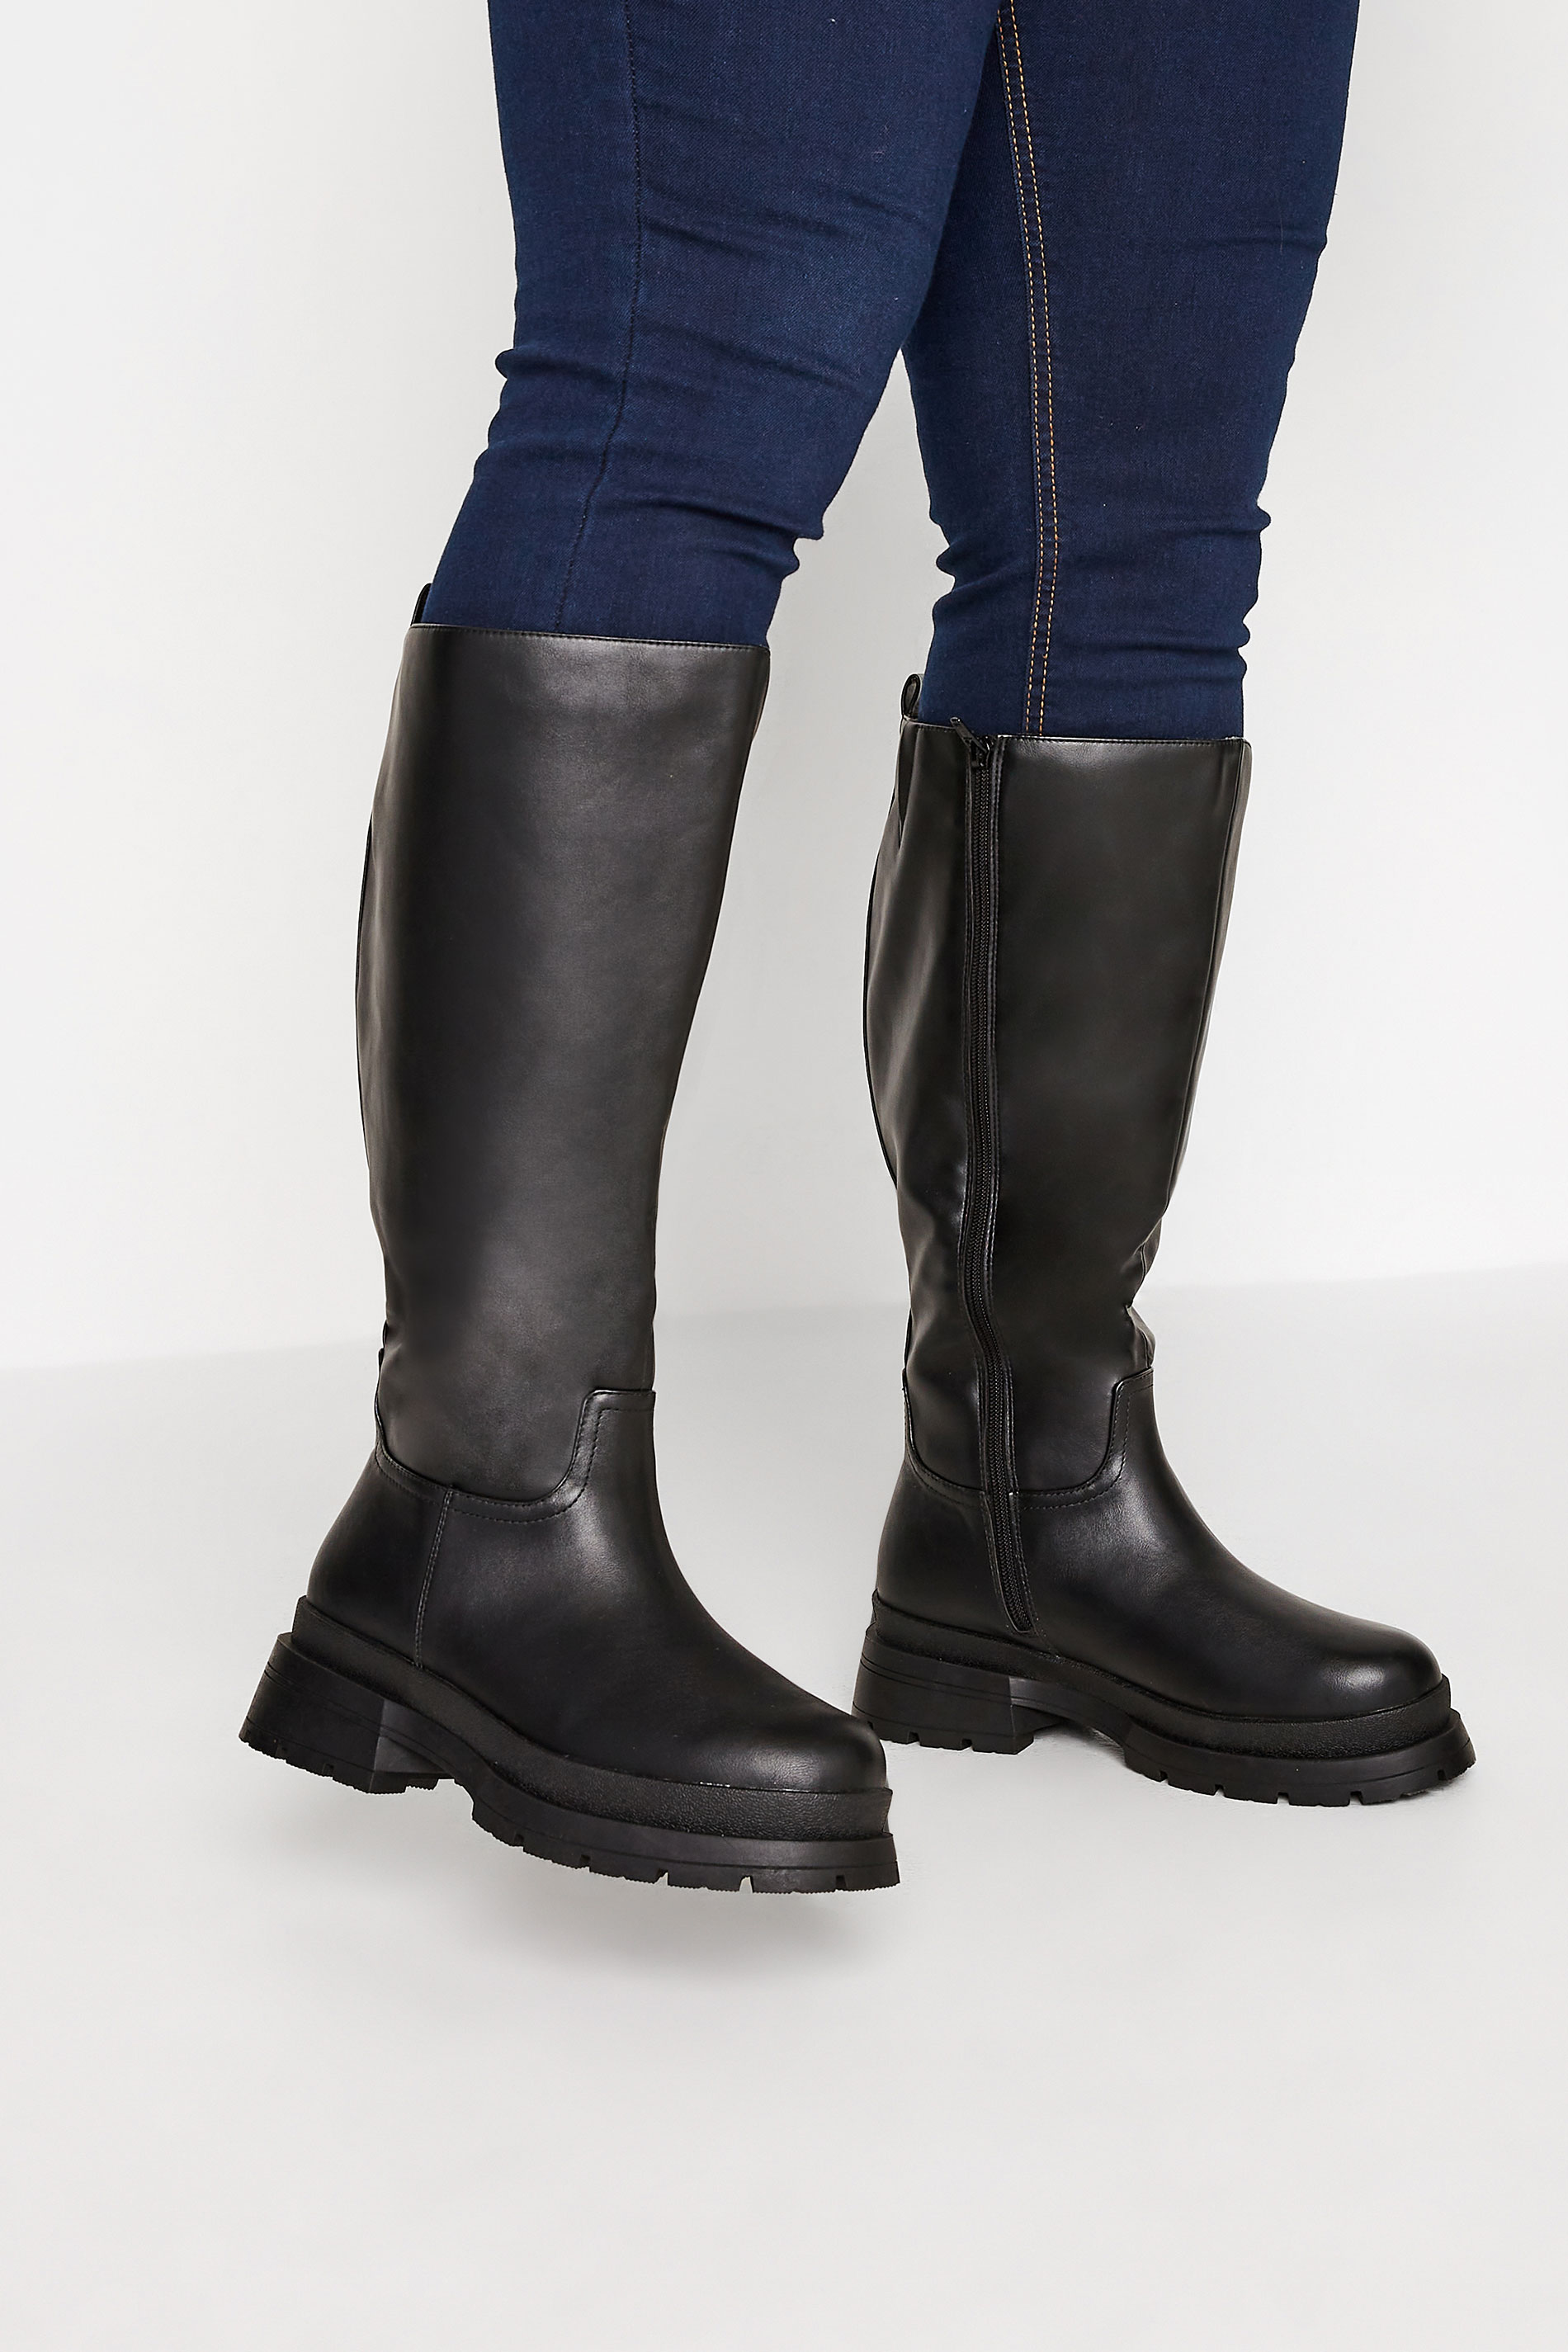 LIMITED COLLECTION Black Faux Leather Pull On Knee High Boots In Extra Wide Fit 1